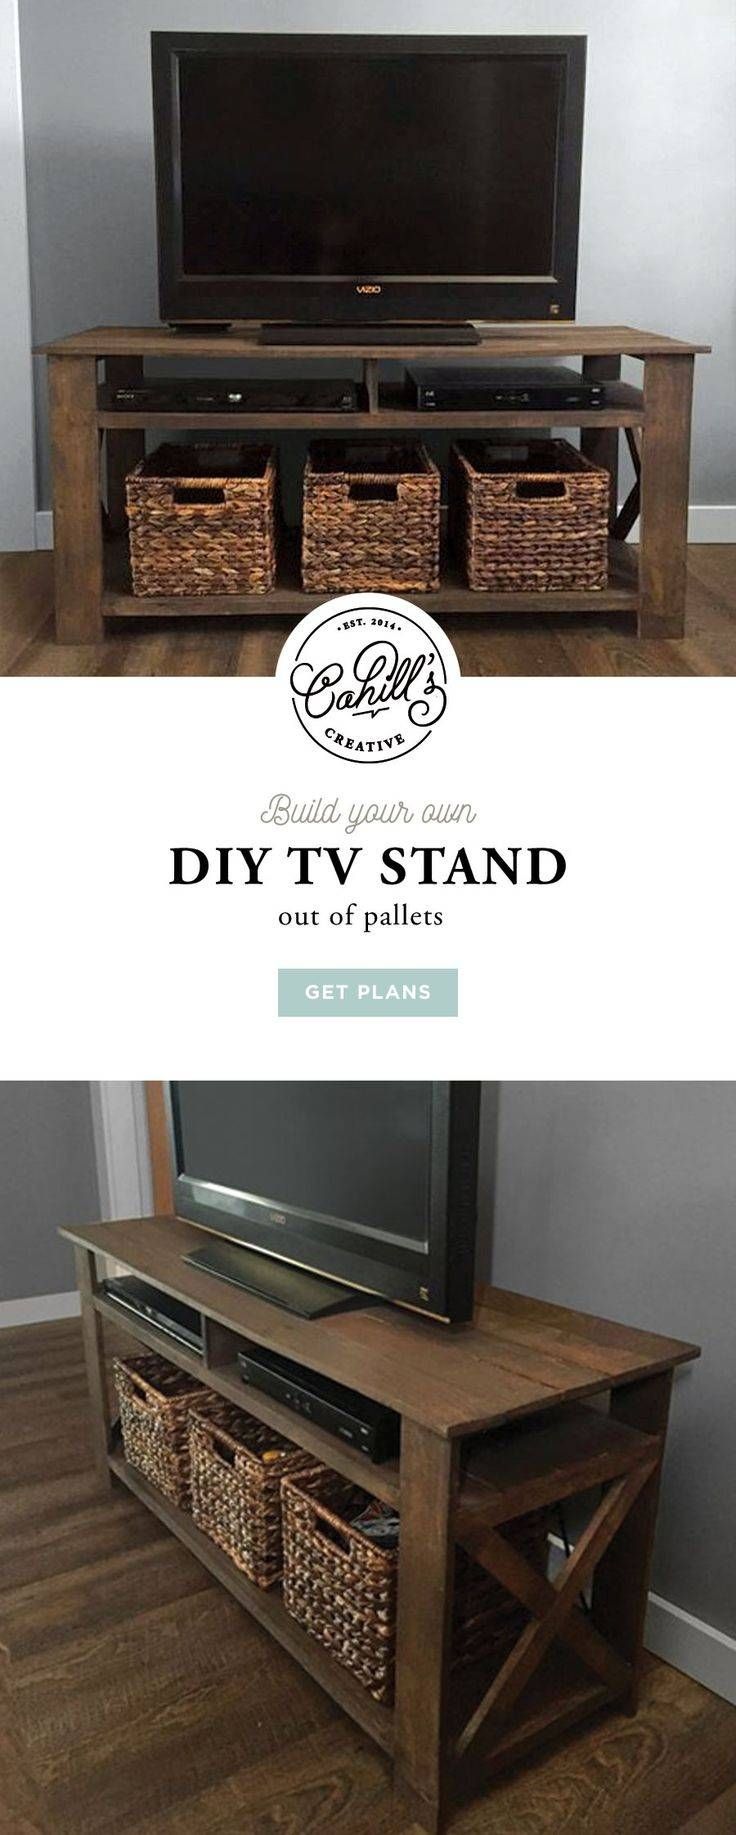 Best 25+ Antique Tv Stands Ideas On Pinterest | Chalk Paint With Regard To Rustic Tv Stands For Sale (Photo 8 of 15)